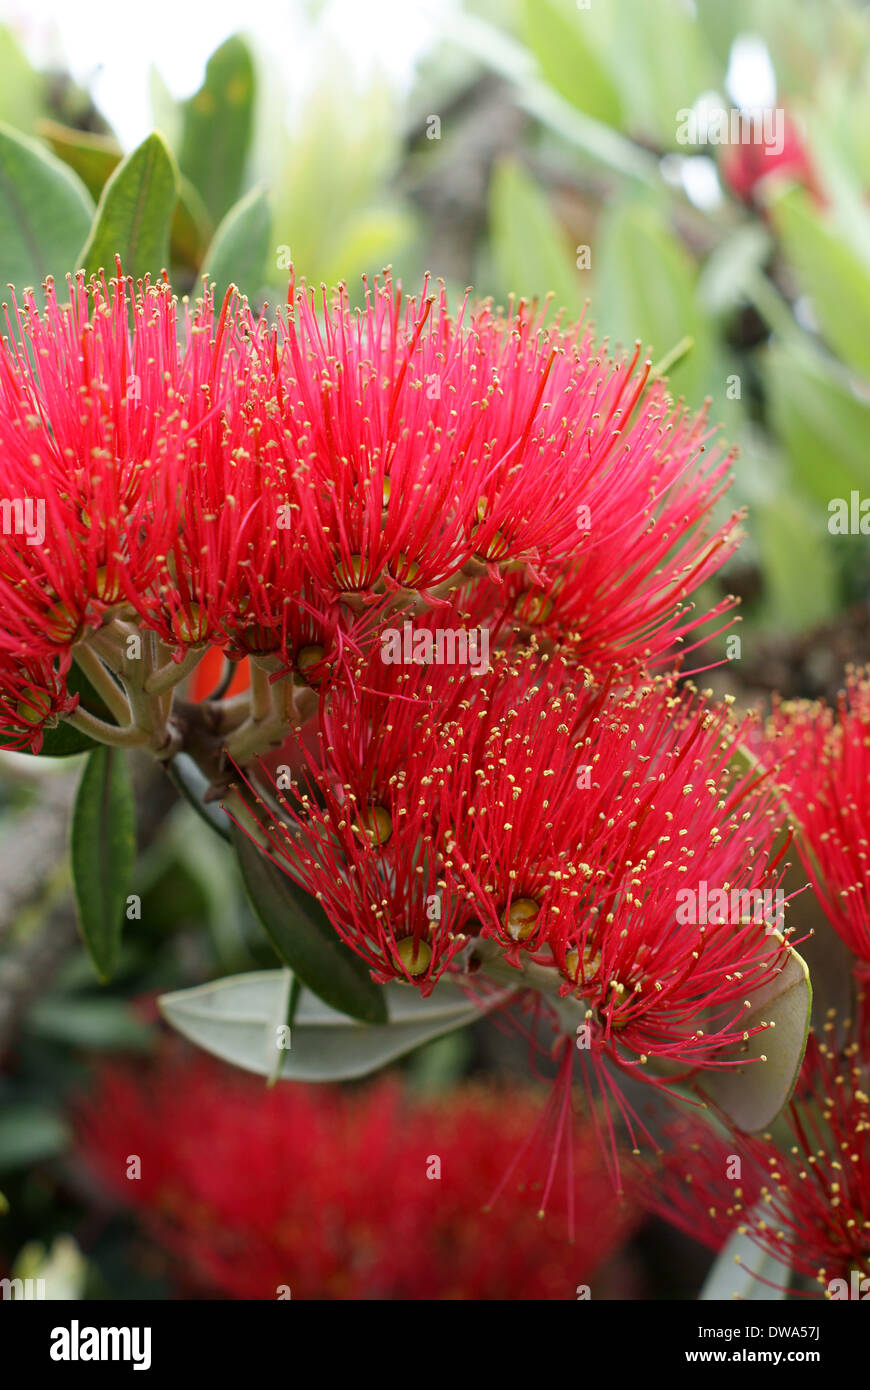 Flowers of the Pohutukawa (Metrosideros excelsa) a native tree of New Zealand referred to as the New Zealand Christmas Tree Stock Photo